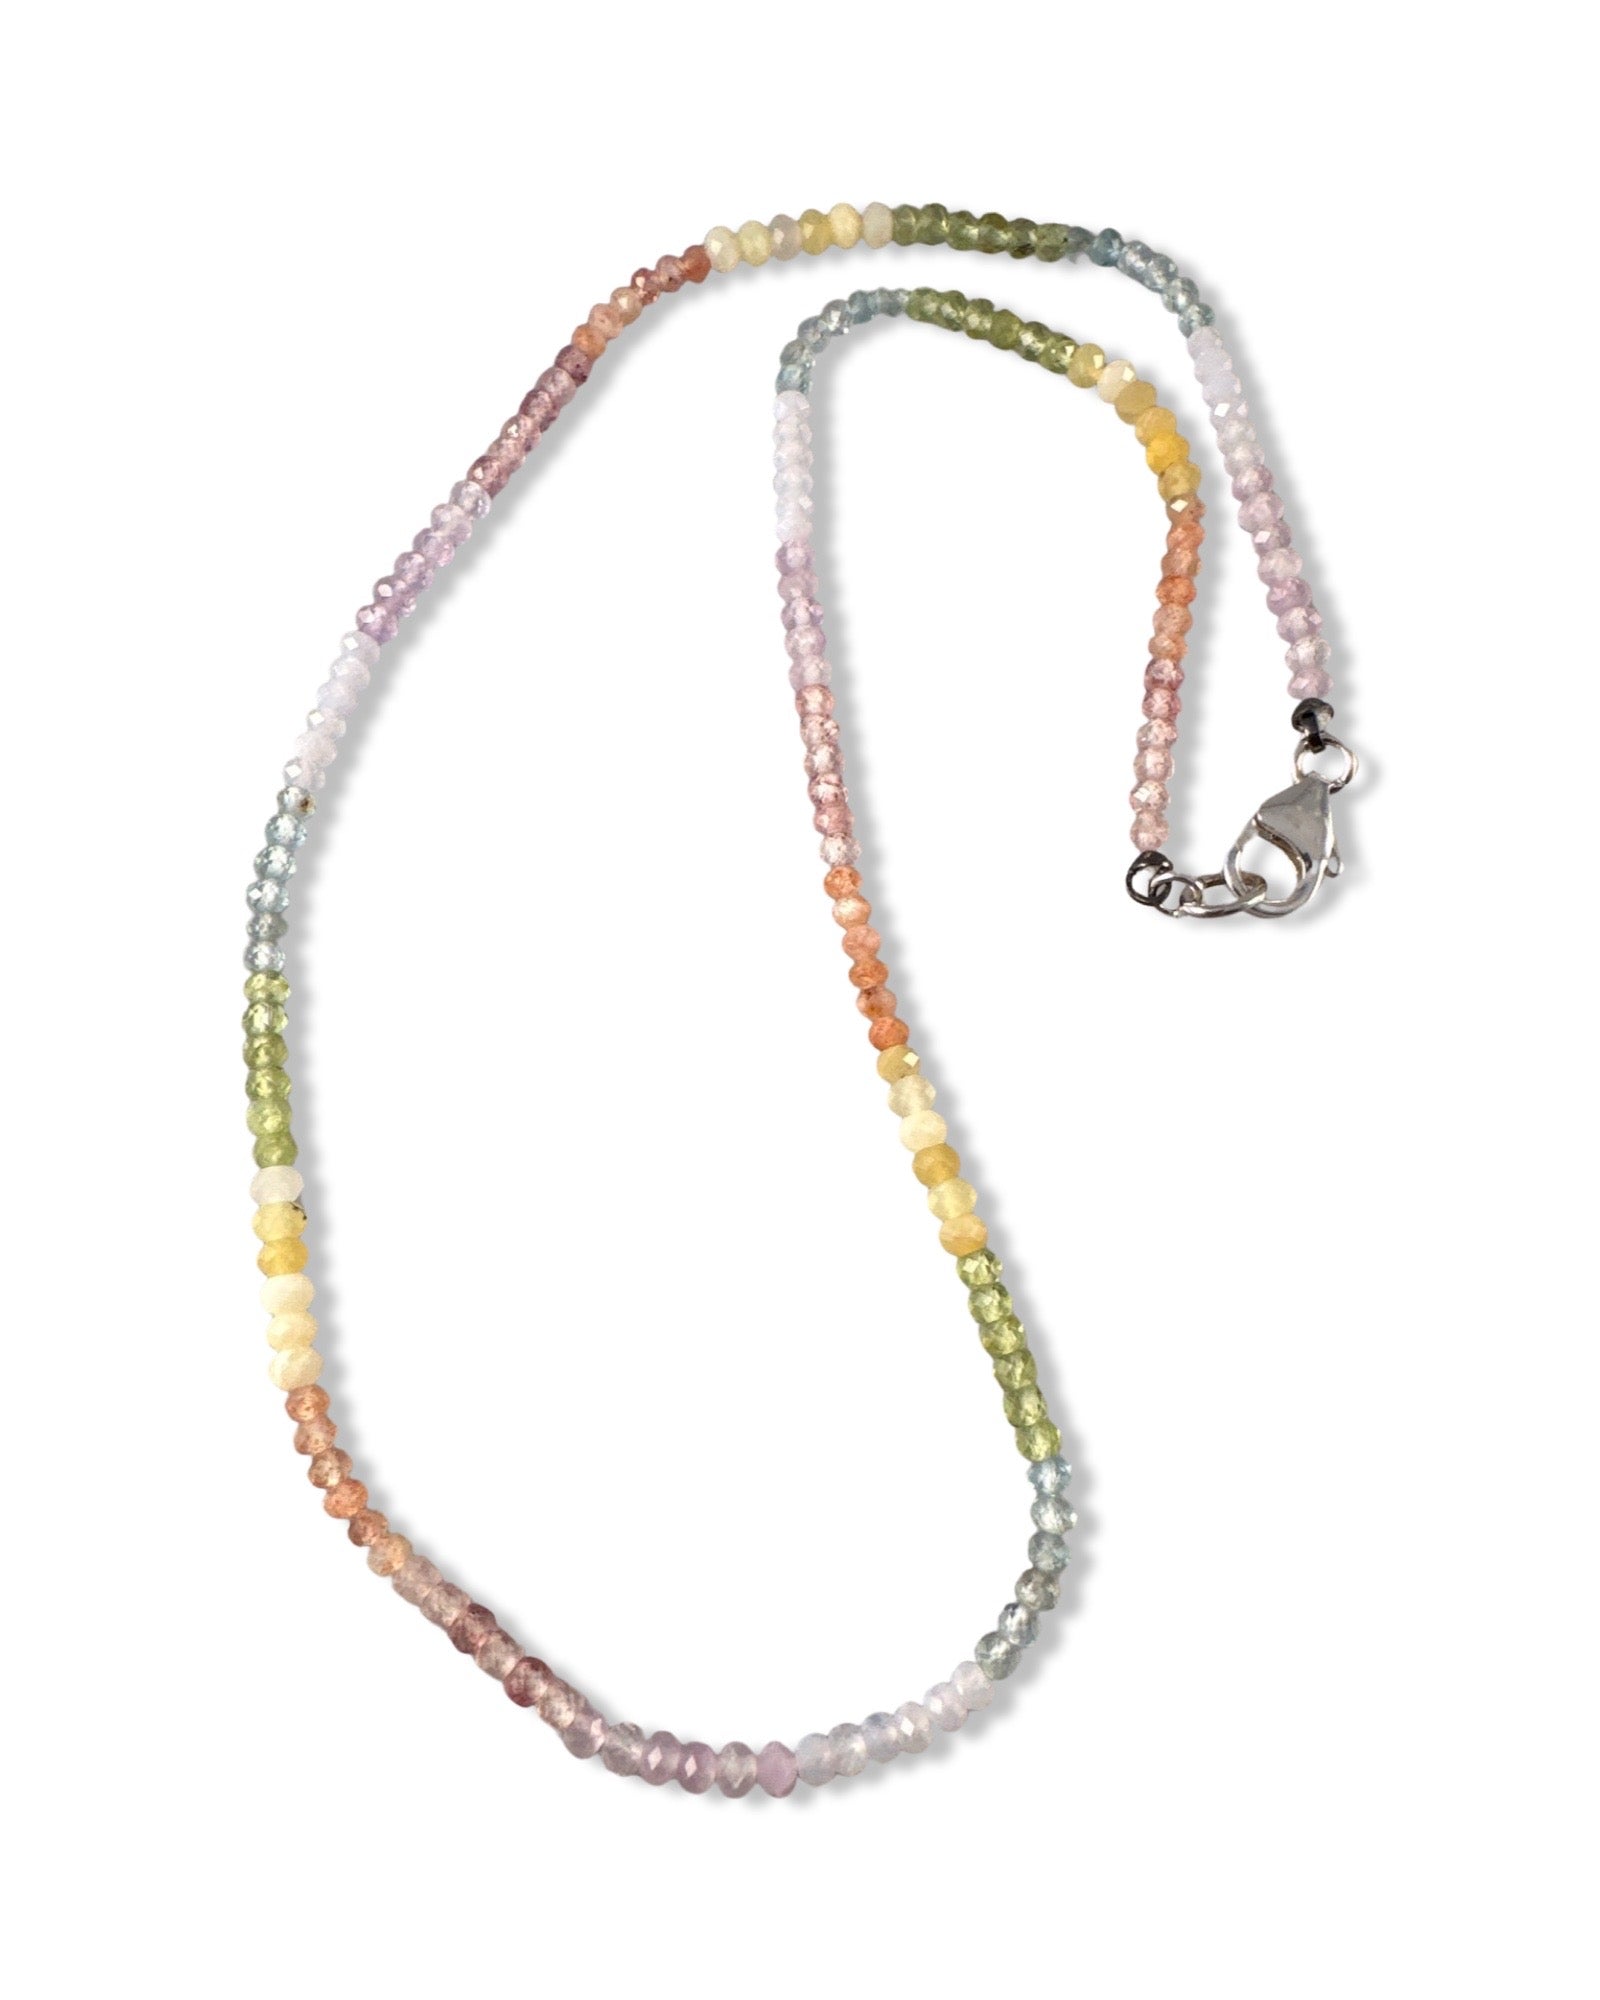 16” Faceted Gemstone Chakra Necklace